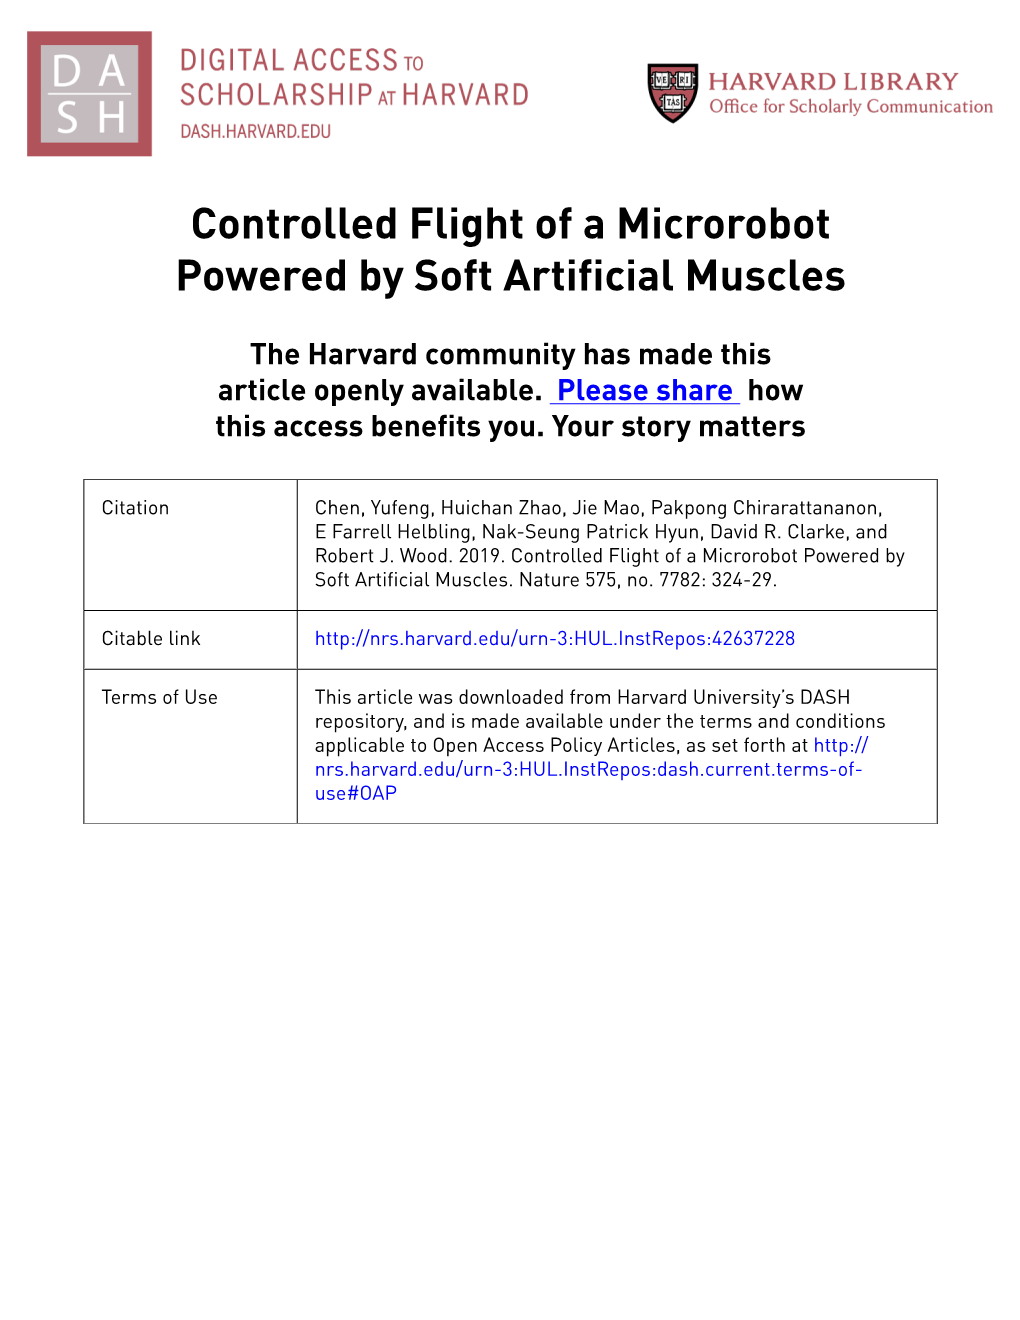 Controlled Flight of a Microrobot Powered by Soft Artificial Muscles